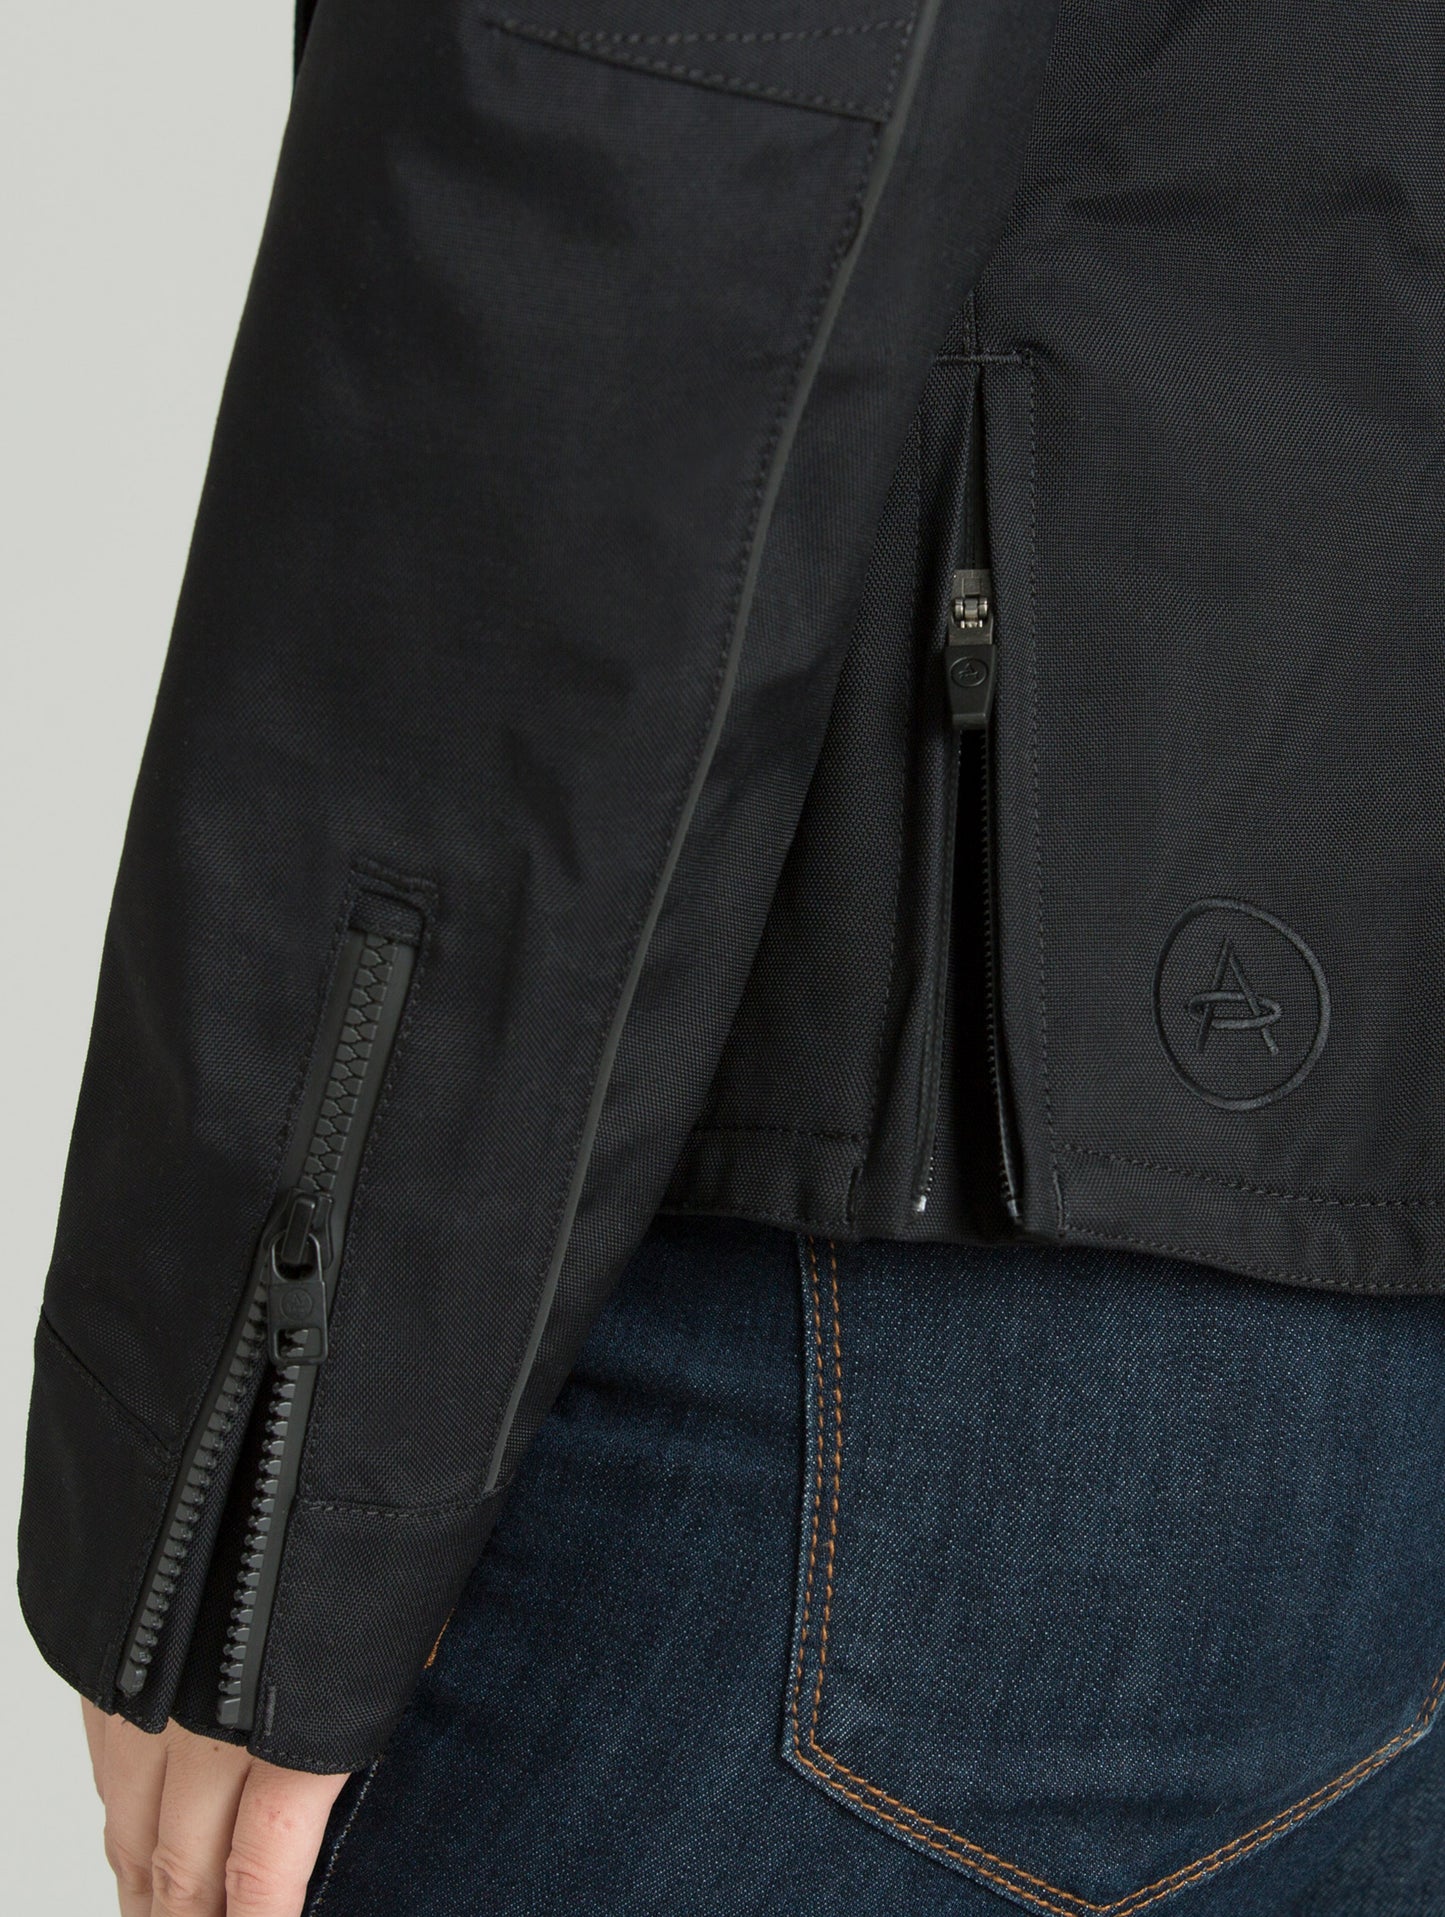 Detail view of black Chase Motorcycle jacket from AETHER Apparel